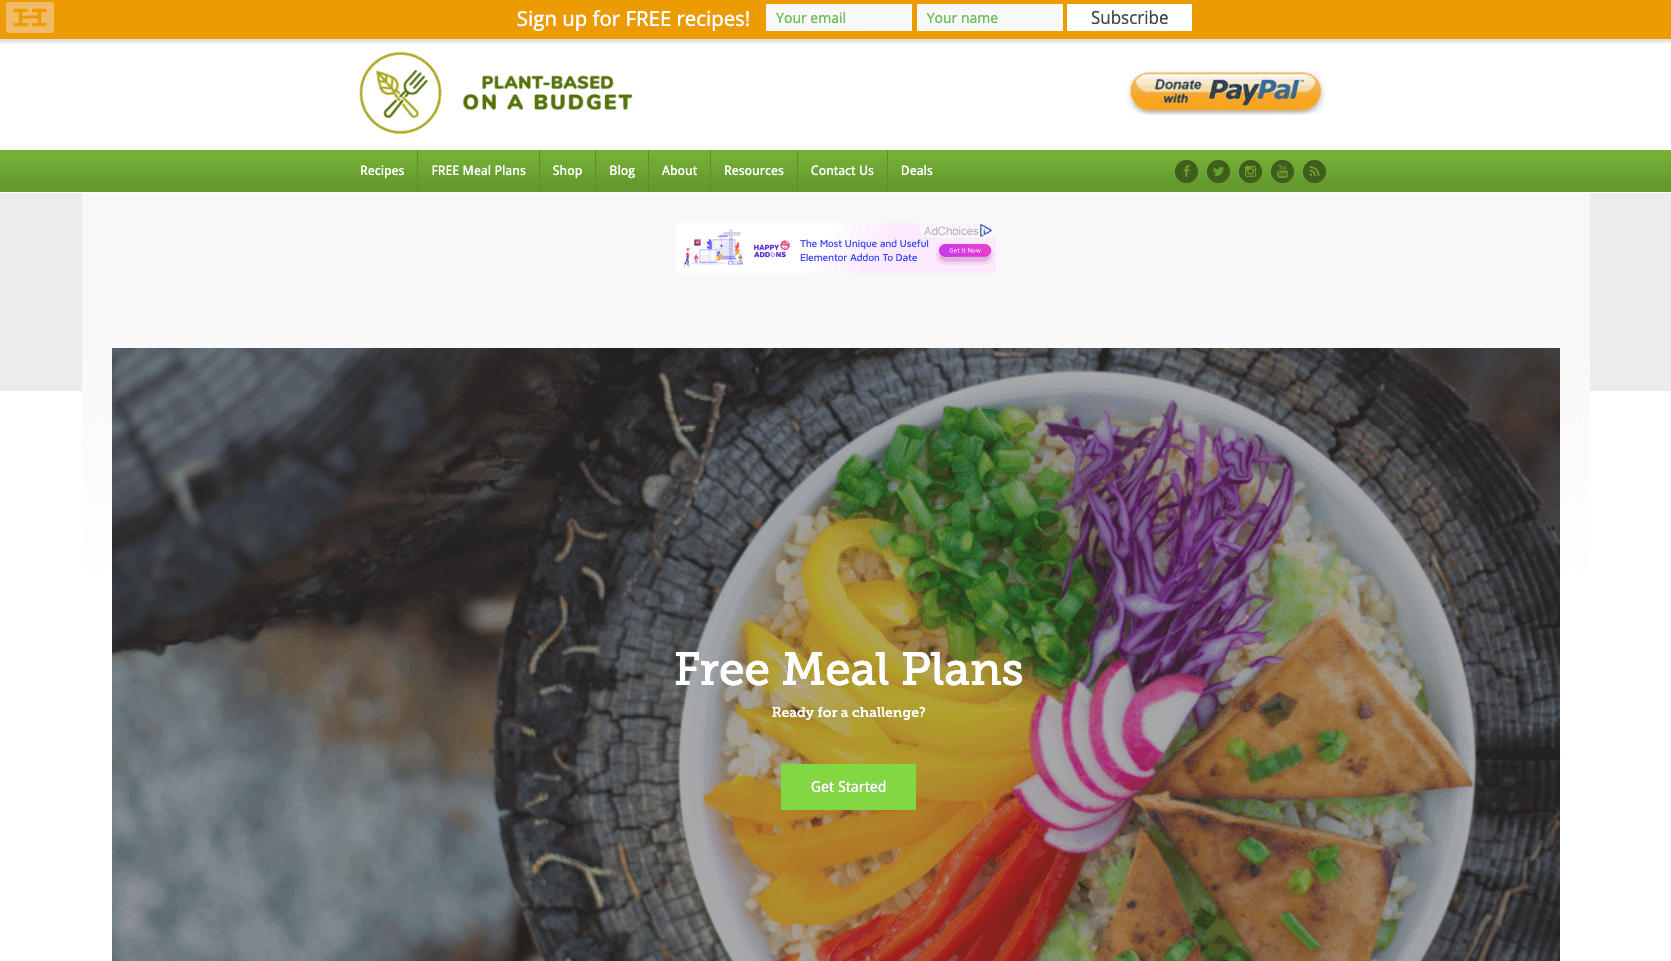 Going vegan is cheap with these free meal plans